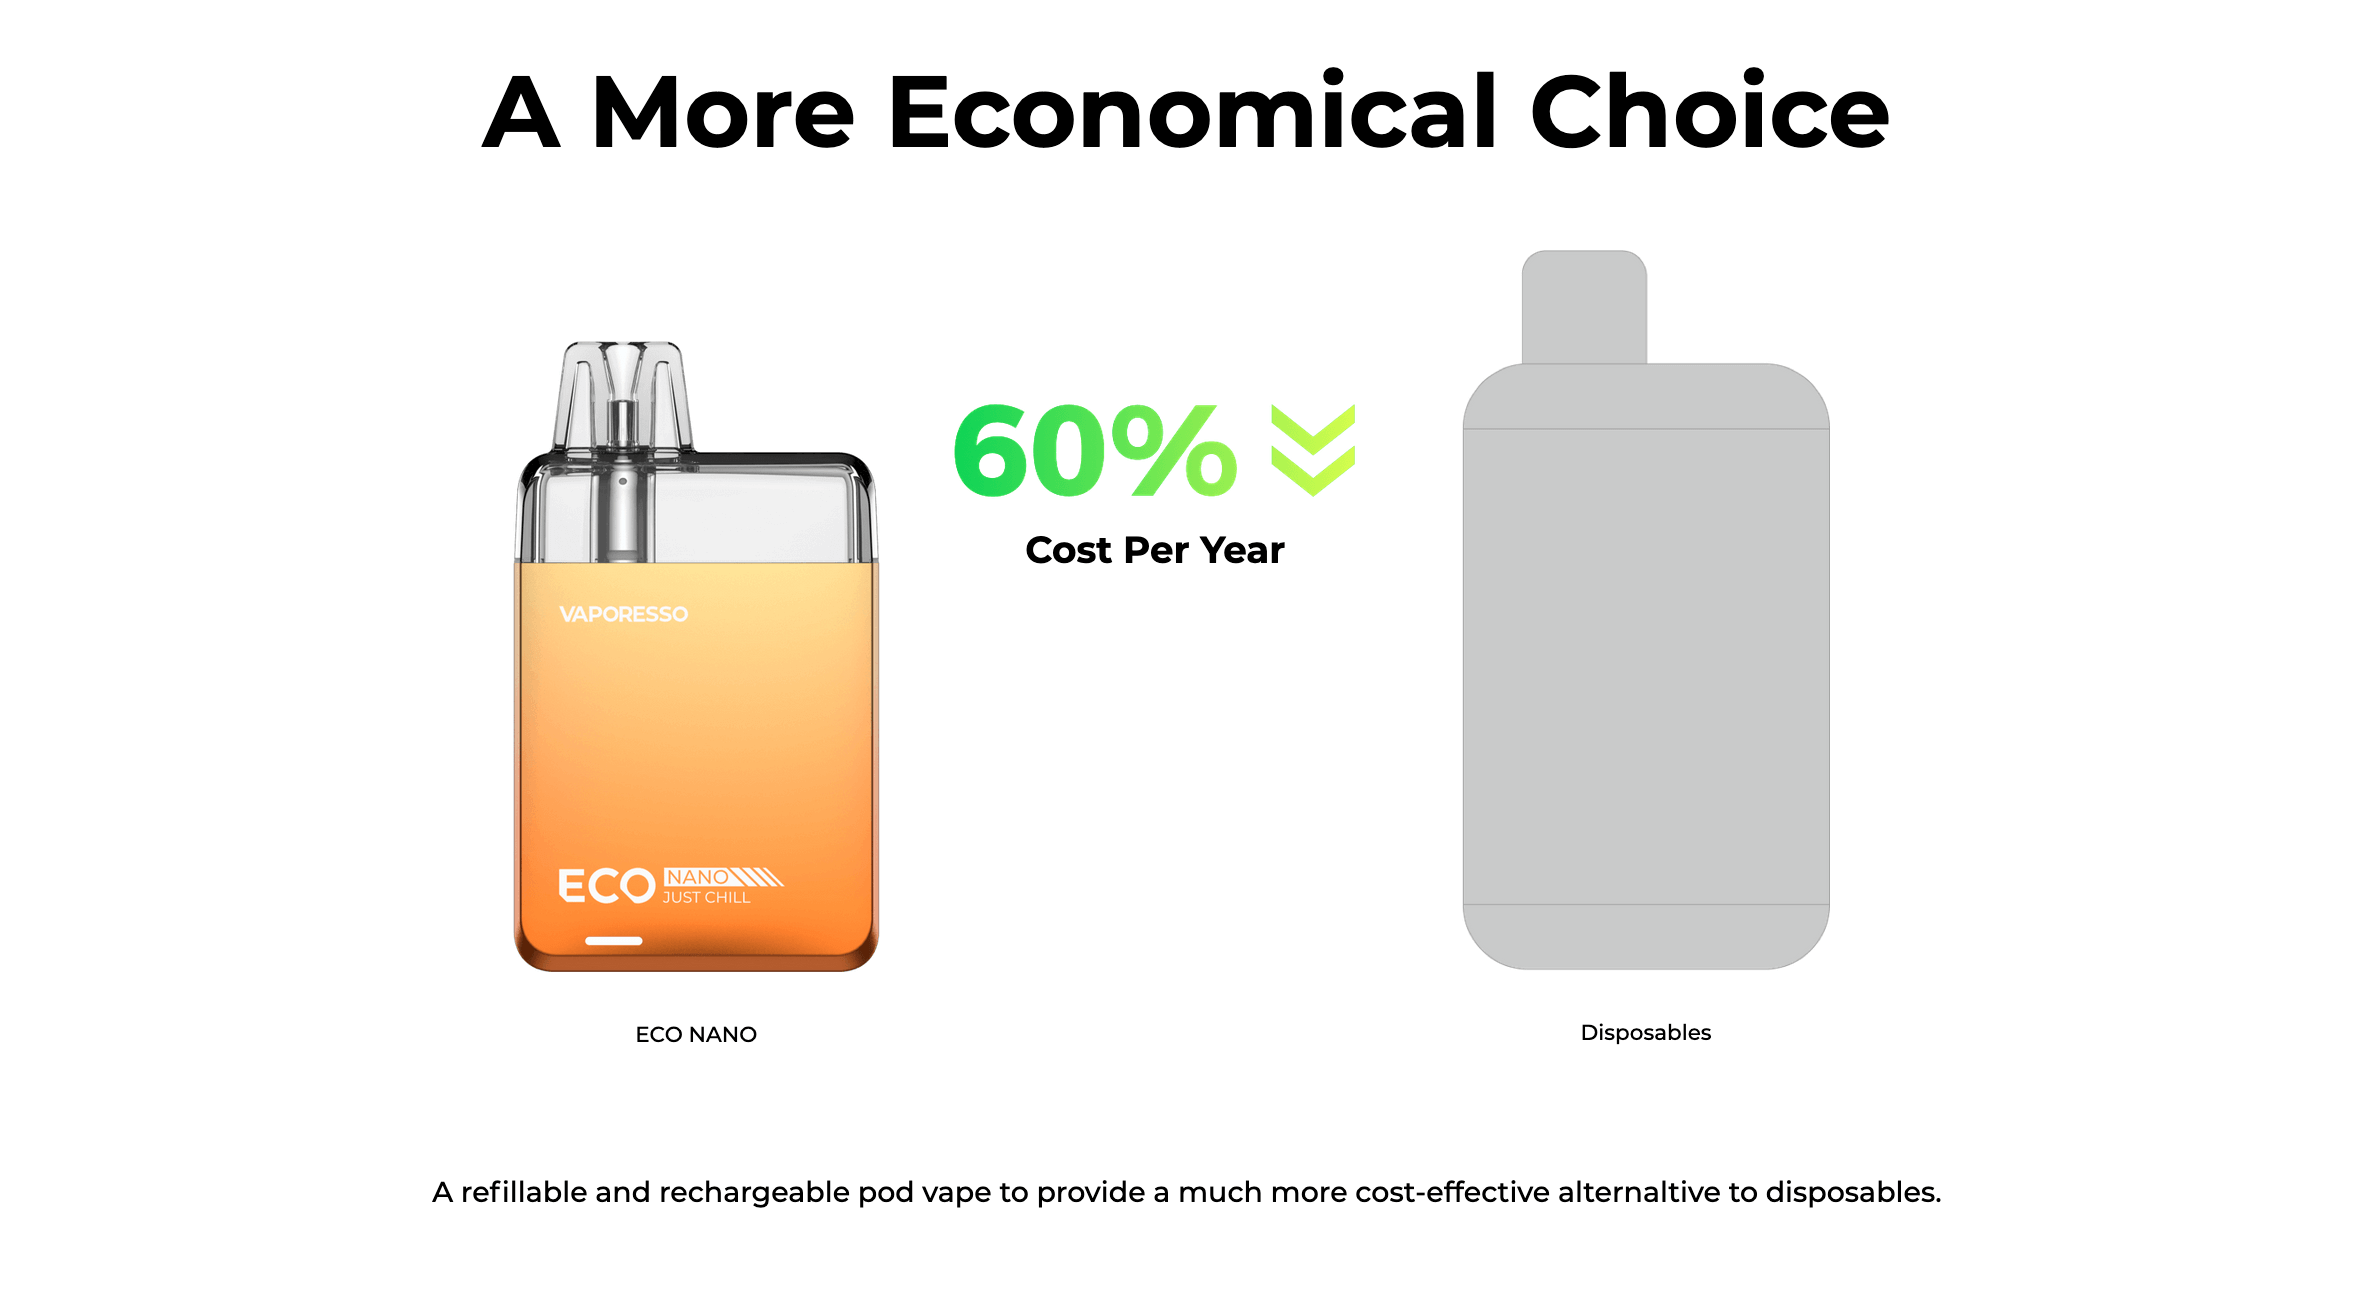 Vaporesso Eco Nano Vape Kit - A more economical choice. Less than 60% of the cost of disposables over a year